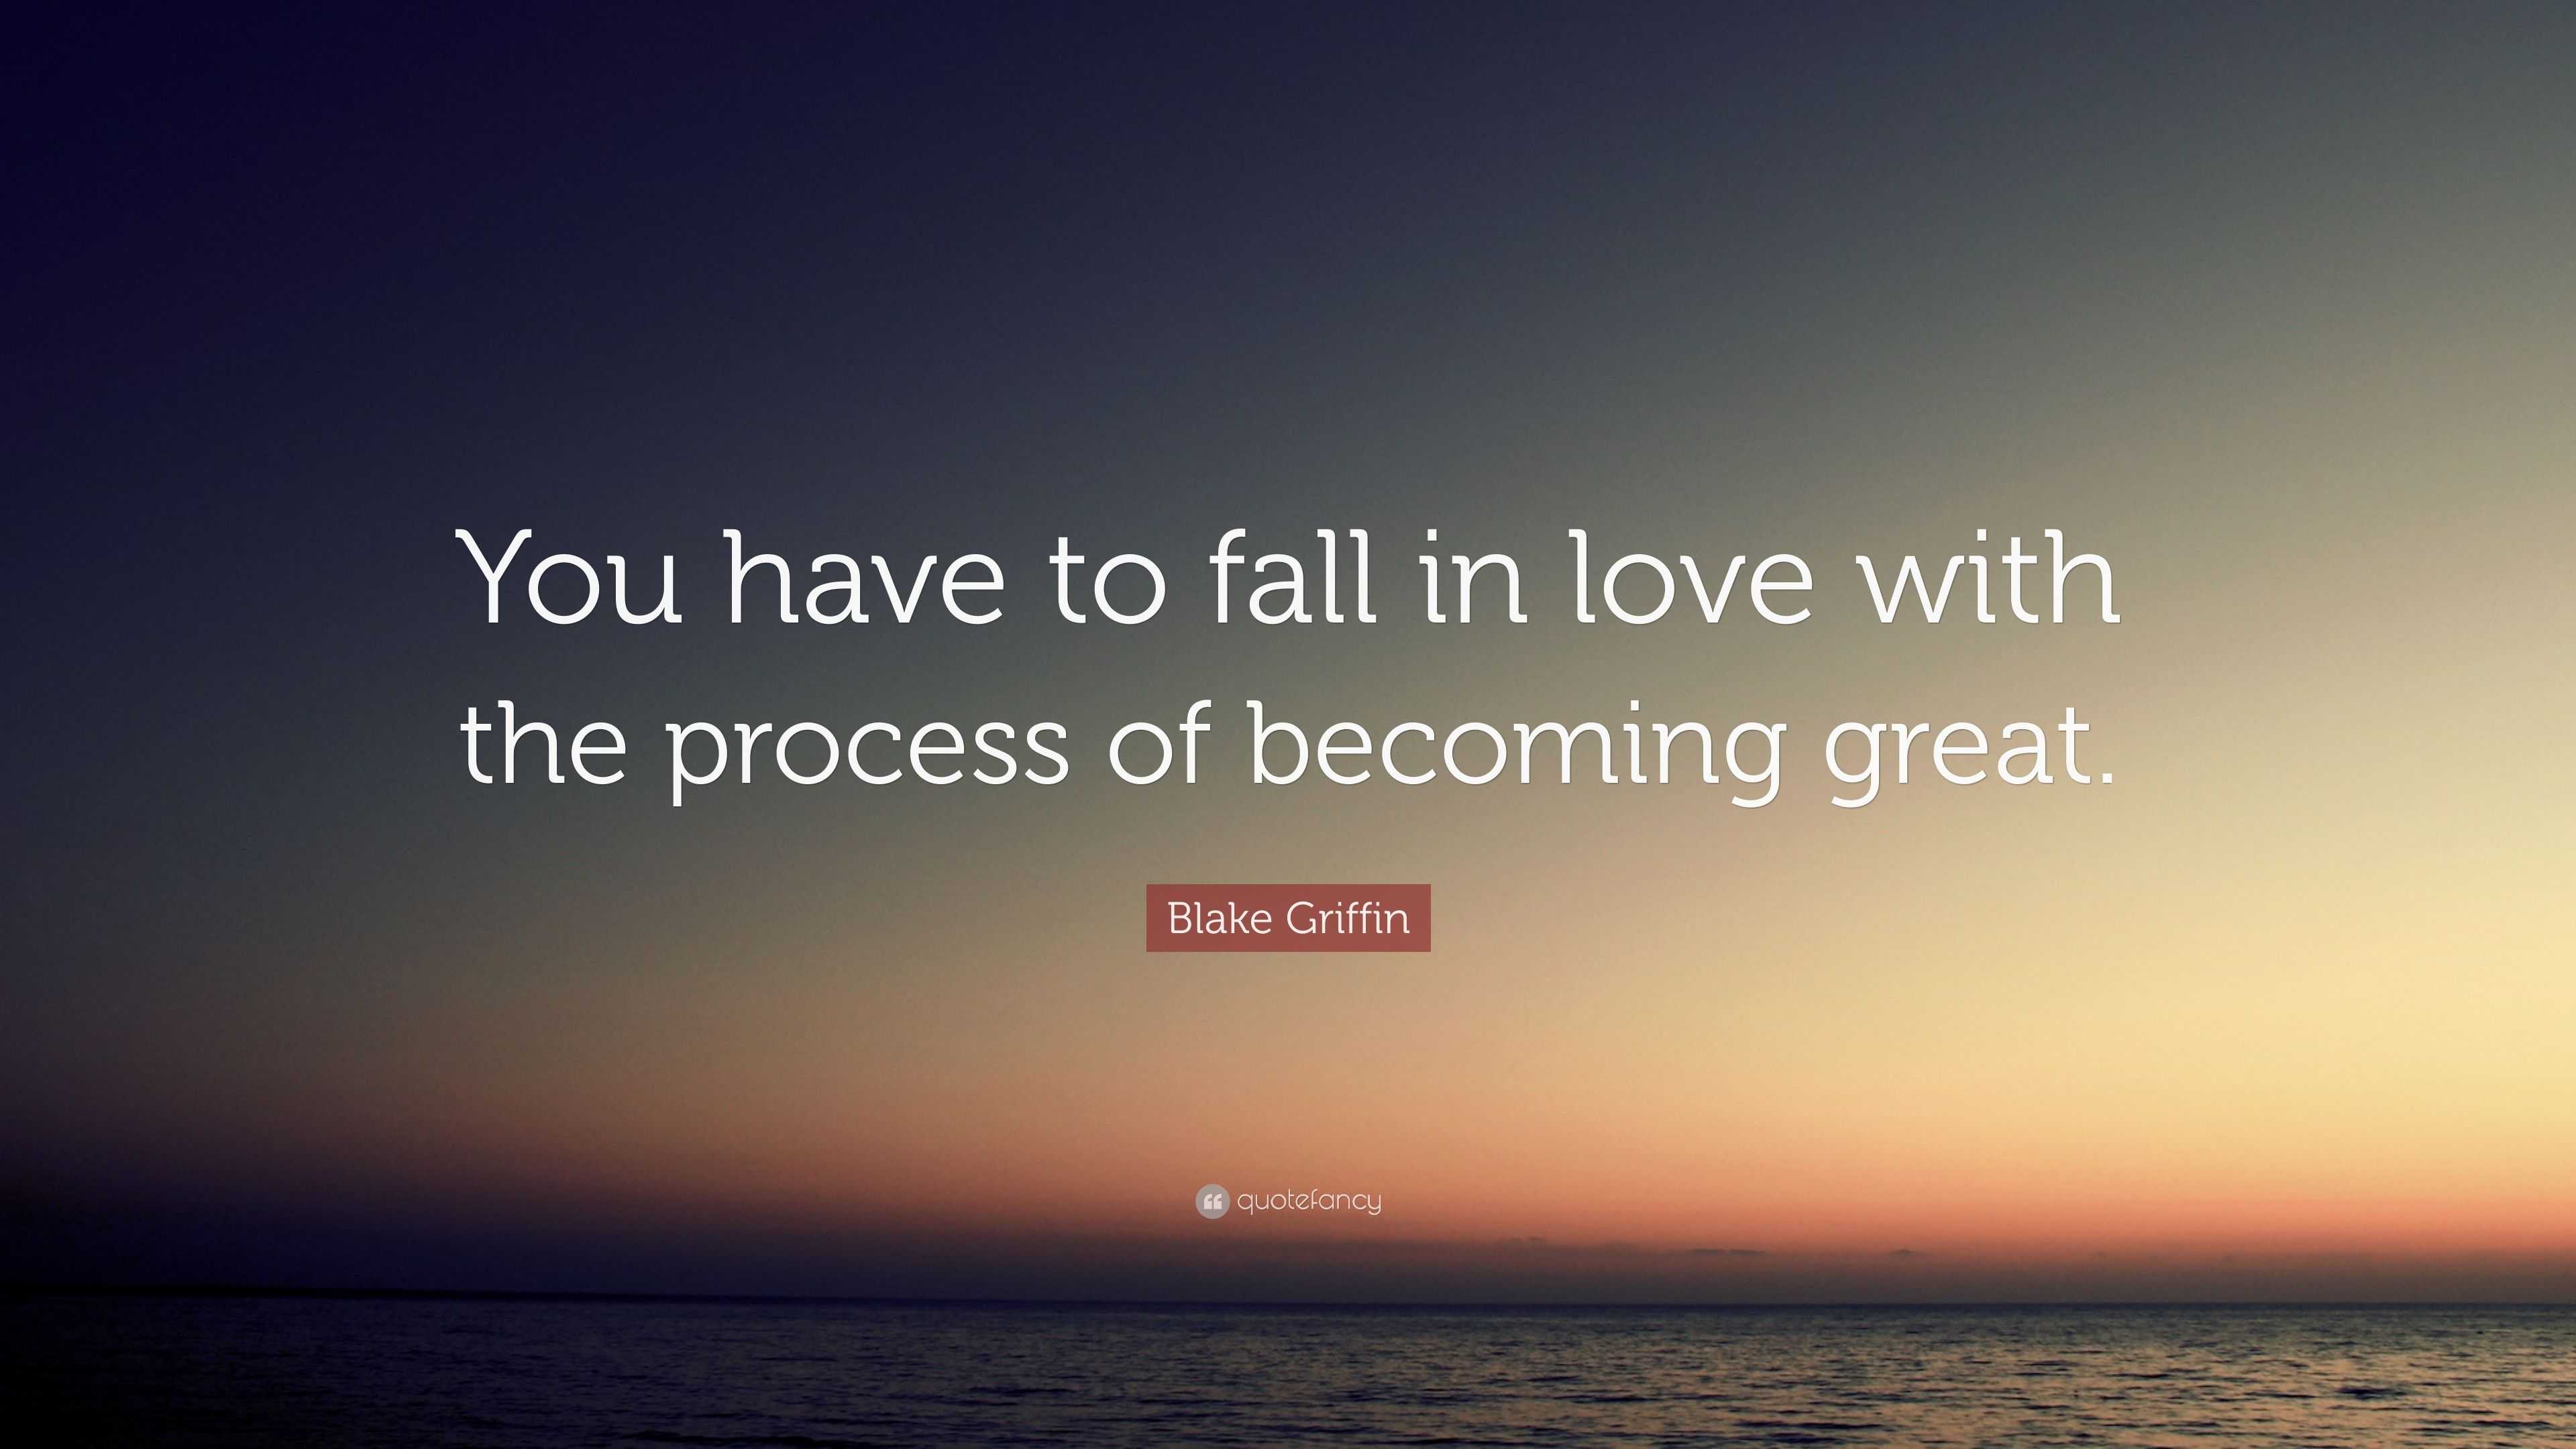 Blake Griffin Quote: “You have to fall in love with the process of ...